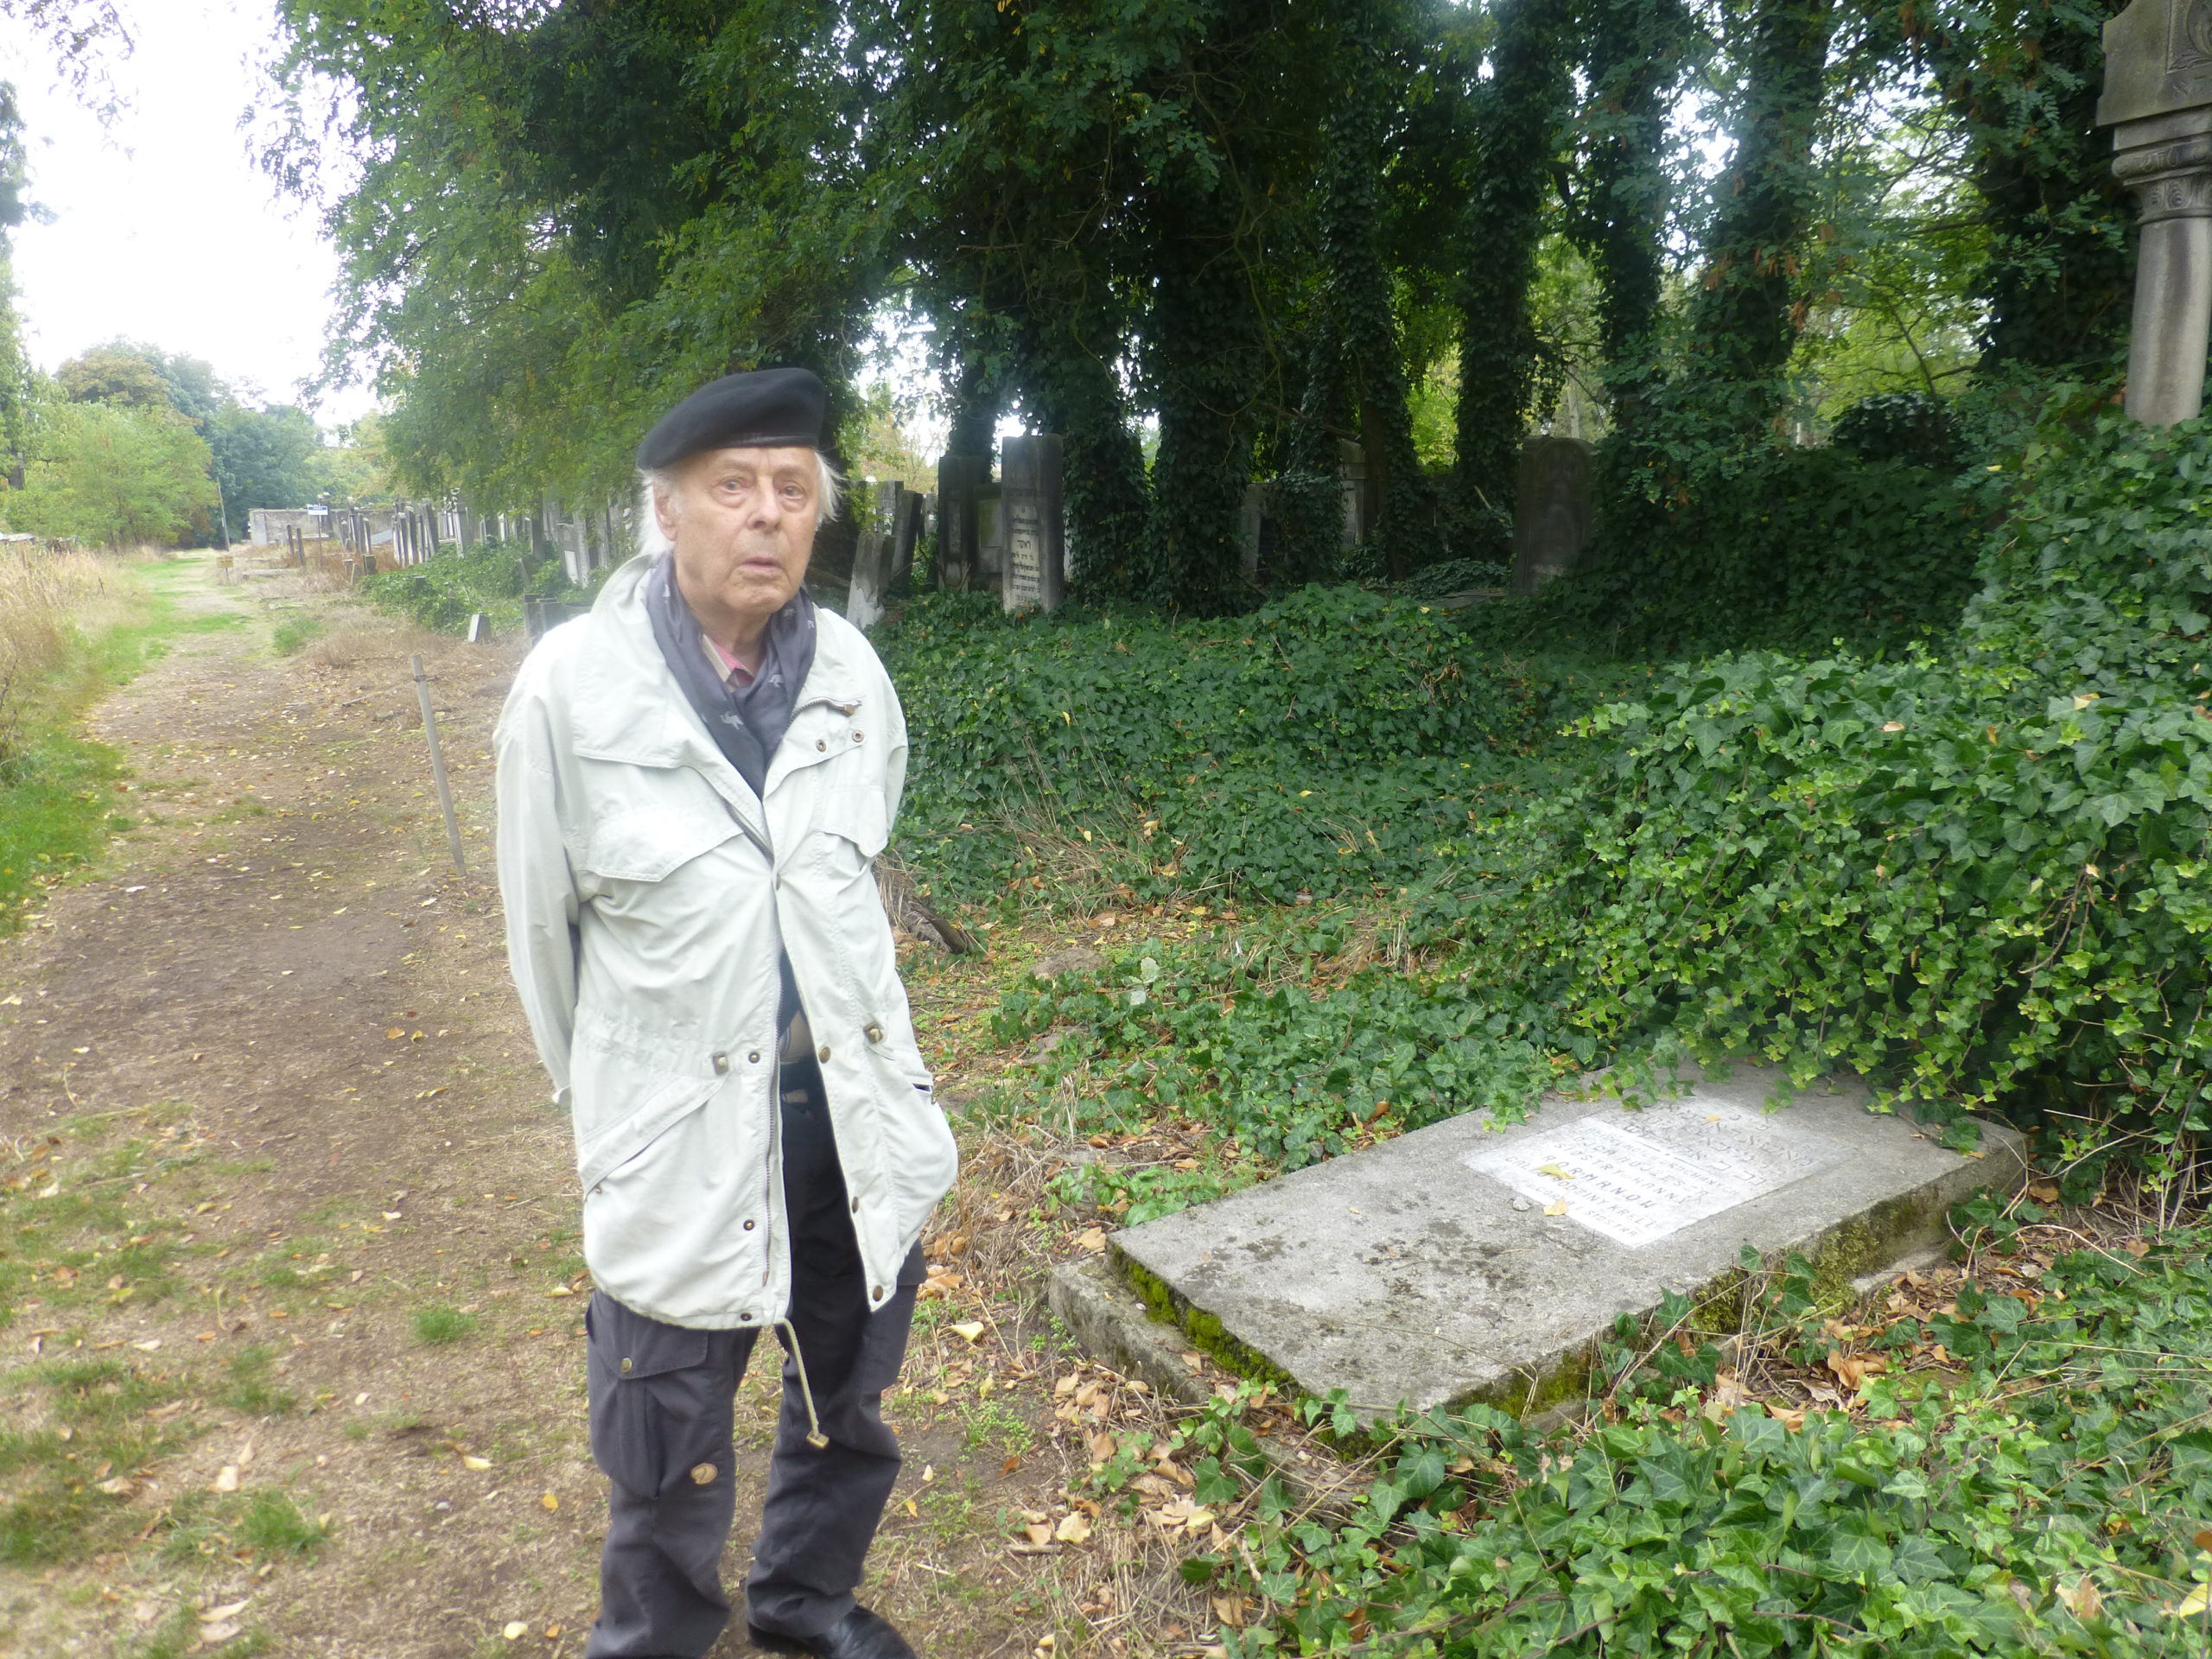 Charley Koenig visits the Jewish Cemetery in Lodz, Poland in 2015